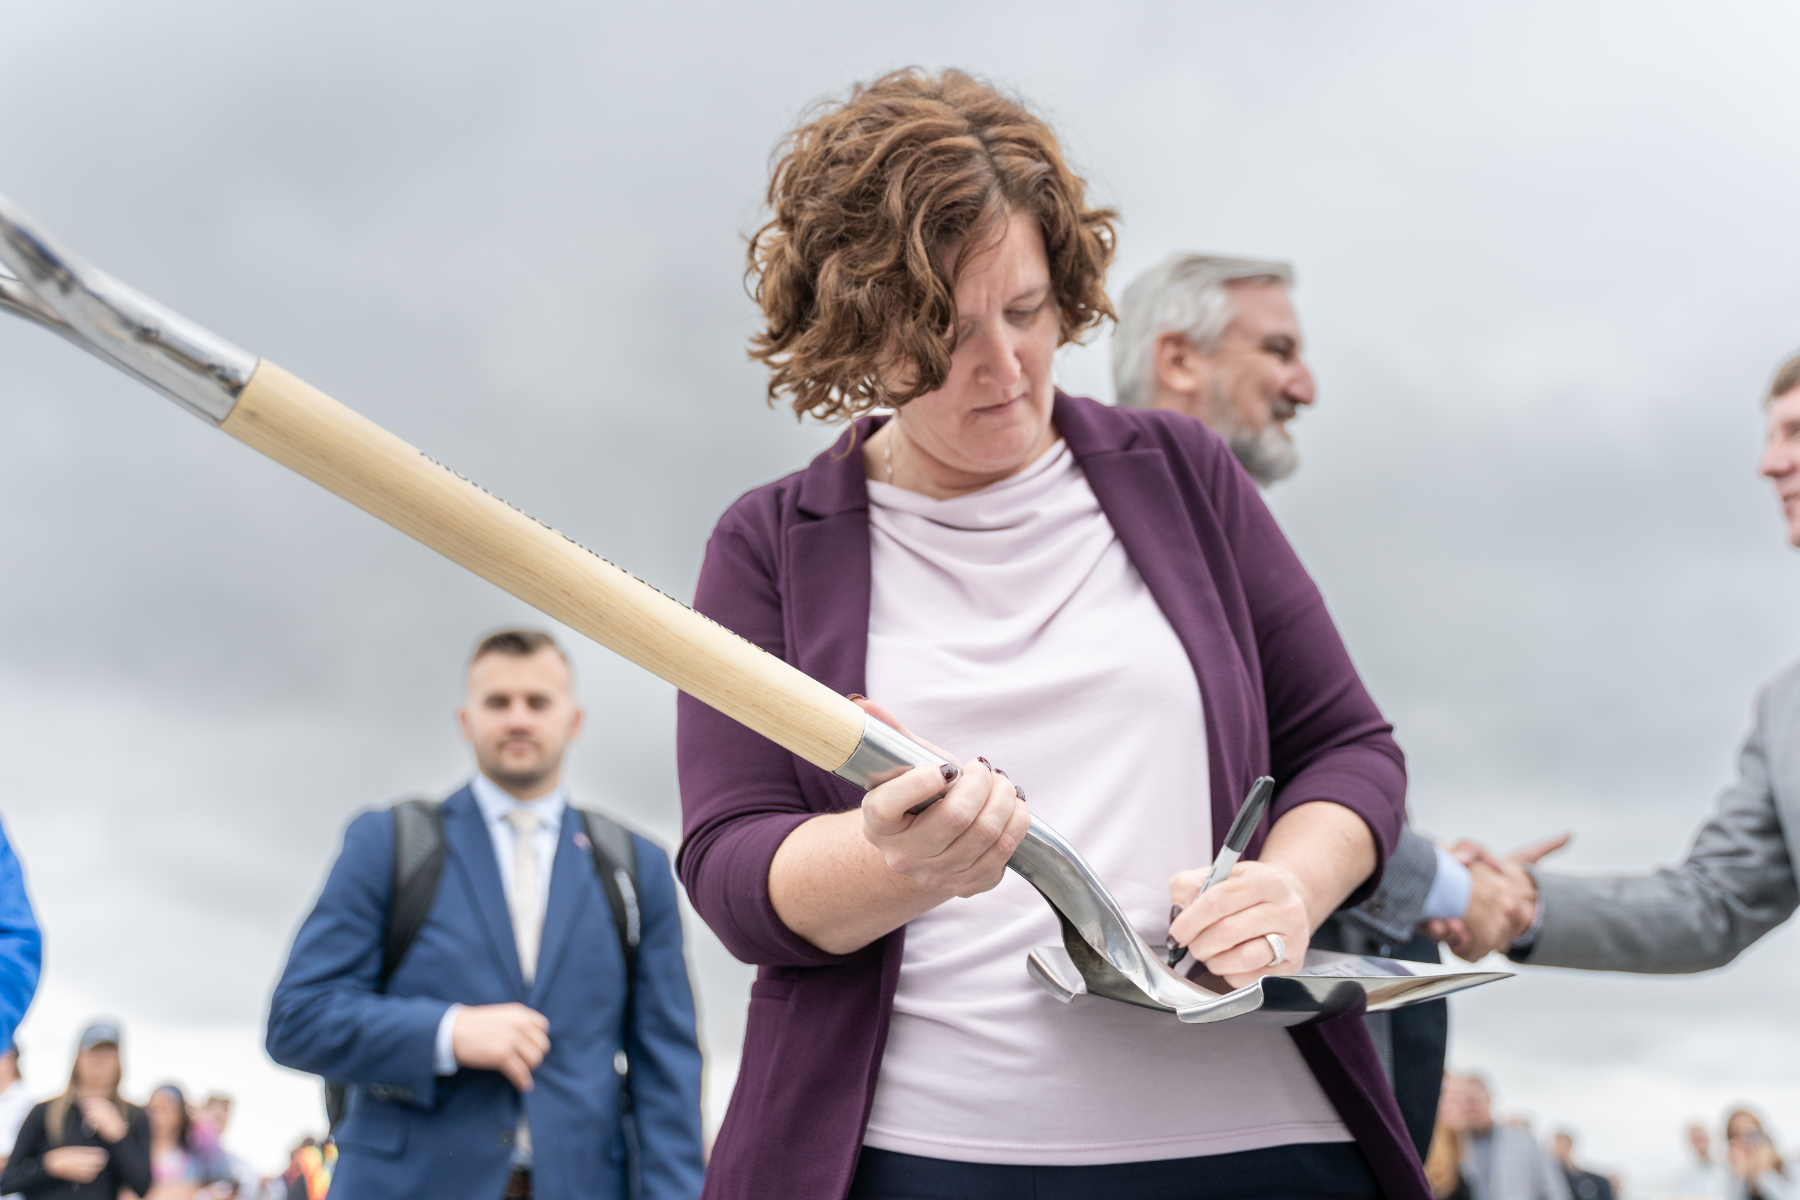 Indiana Department of Correction Commissioner Christina Reagle signs a commemorative shovel on Thursday, Sep. 28, 2023 during the groundbreaking ceremony for the new $1.2 Billion correctional facility under construction in Westville, Indiana. SCOTT ROBERSON | Indiana Department of Correction